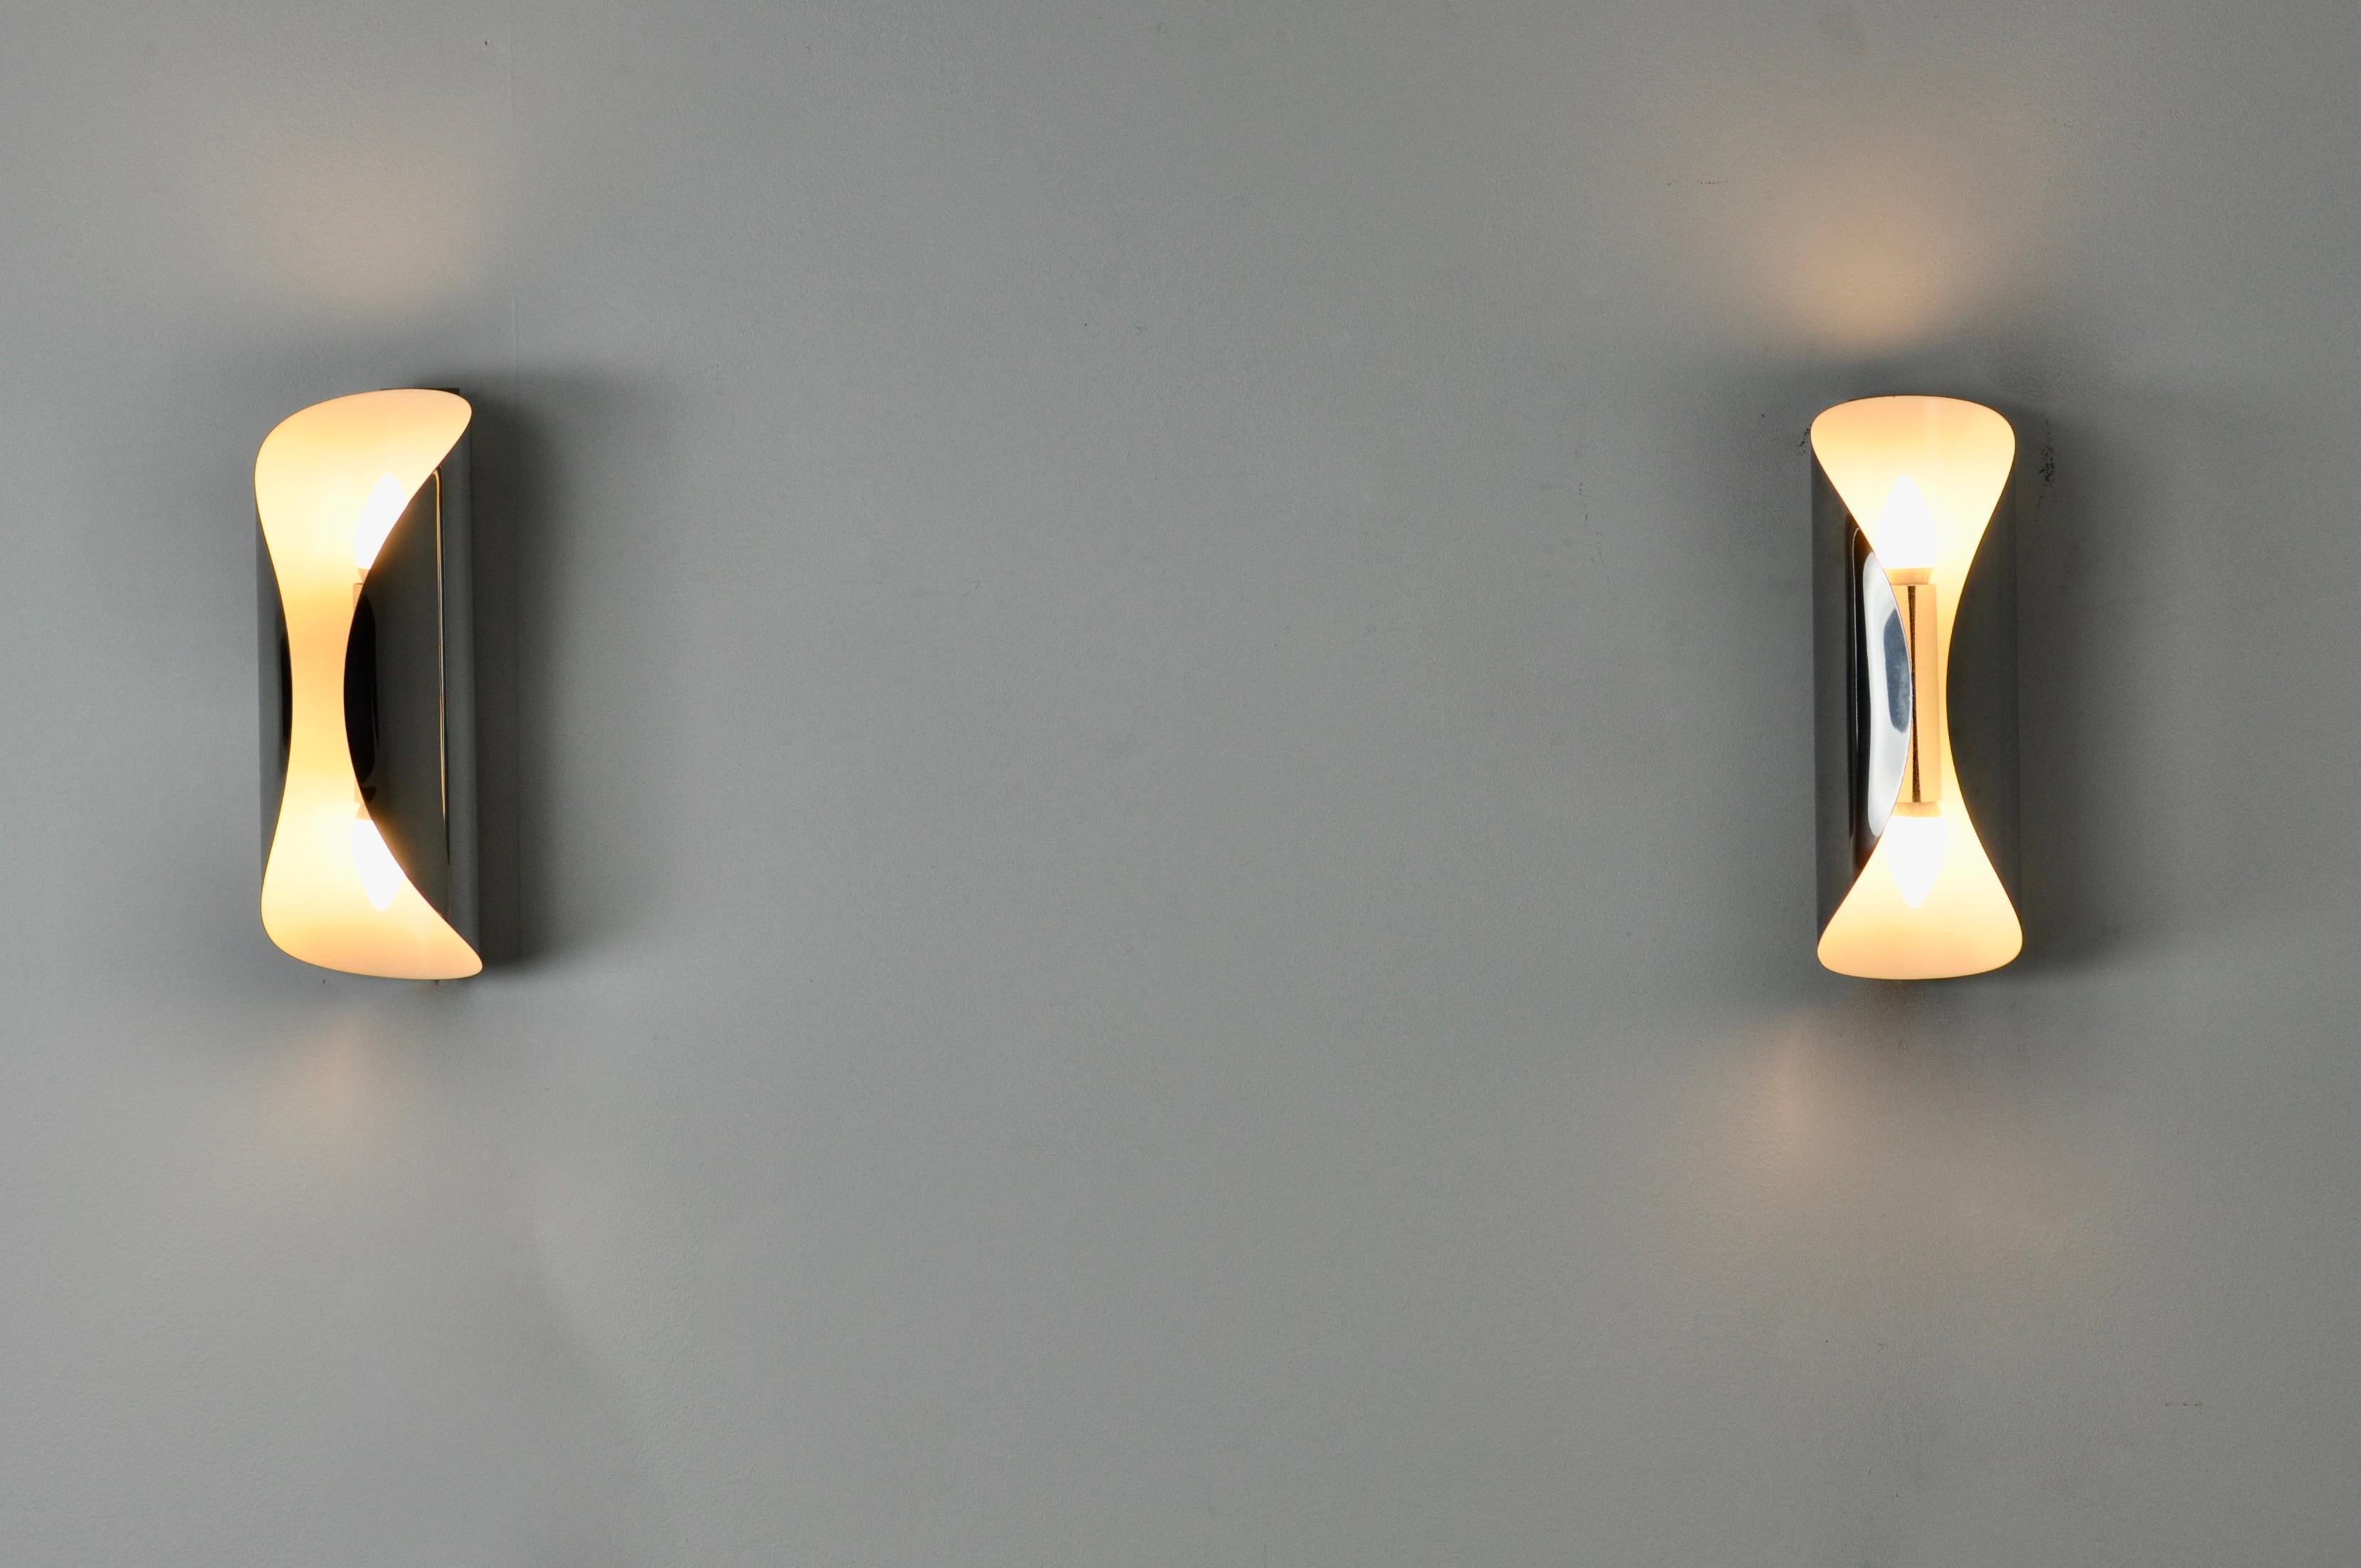 Pair of chrome plated metal sconces. 2 points of light. Wear and tear due to time and age of sconces.